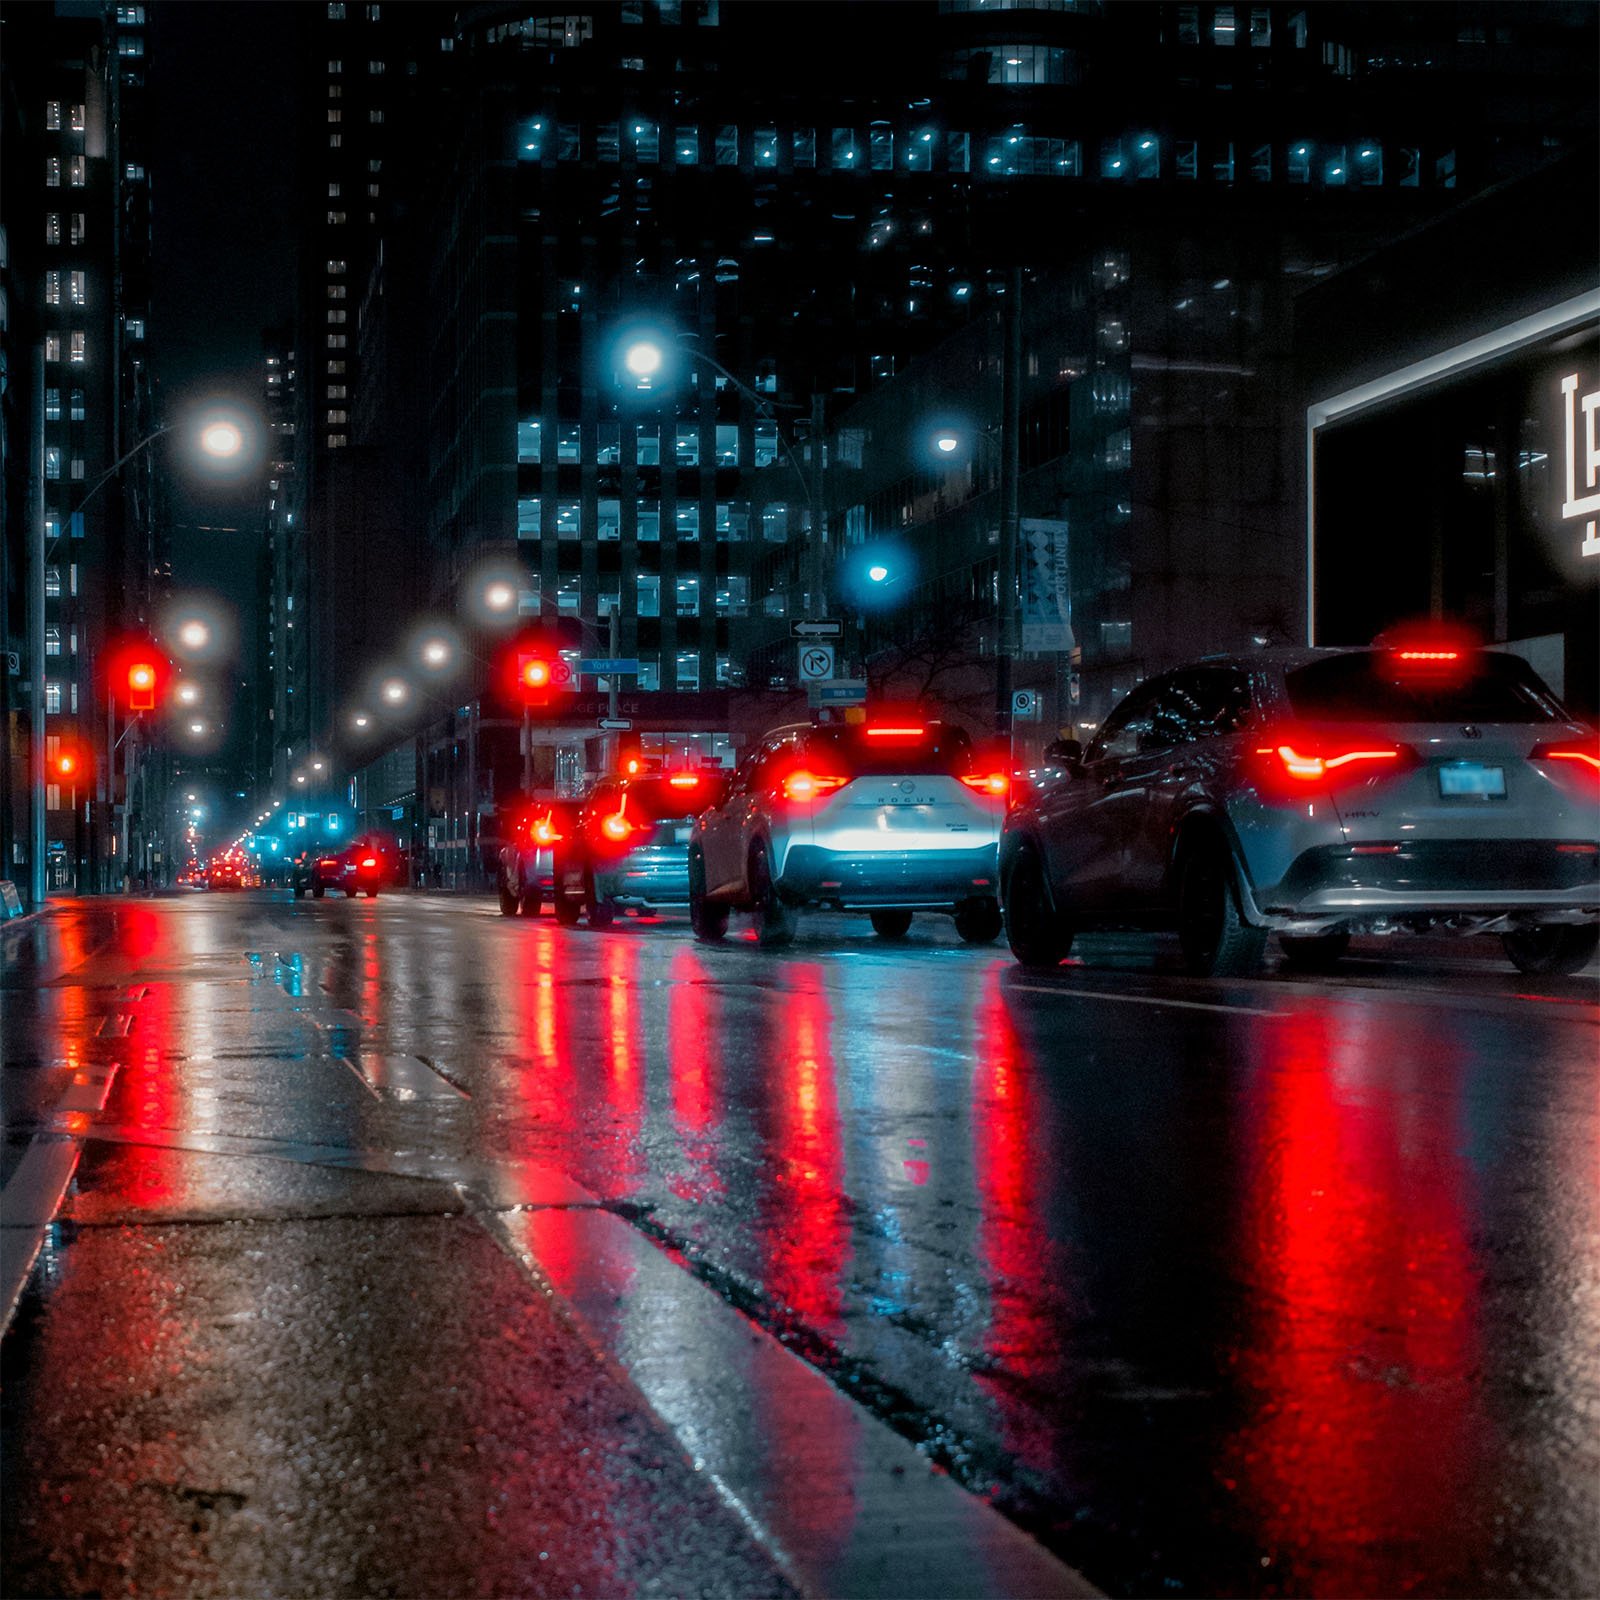 A city street at night is illuminated by streetlights and red taillights of cars lined up in traffic. The wet pavement reflects the vibrant lights, adding a colorful glow to the scene. Tall buildings with lit windows border the street.